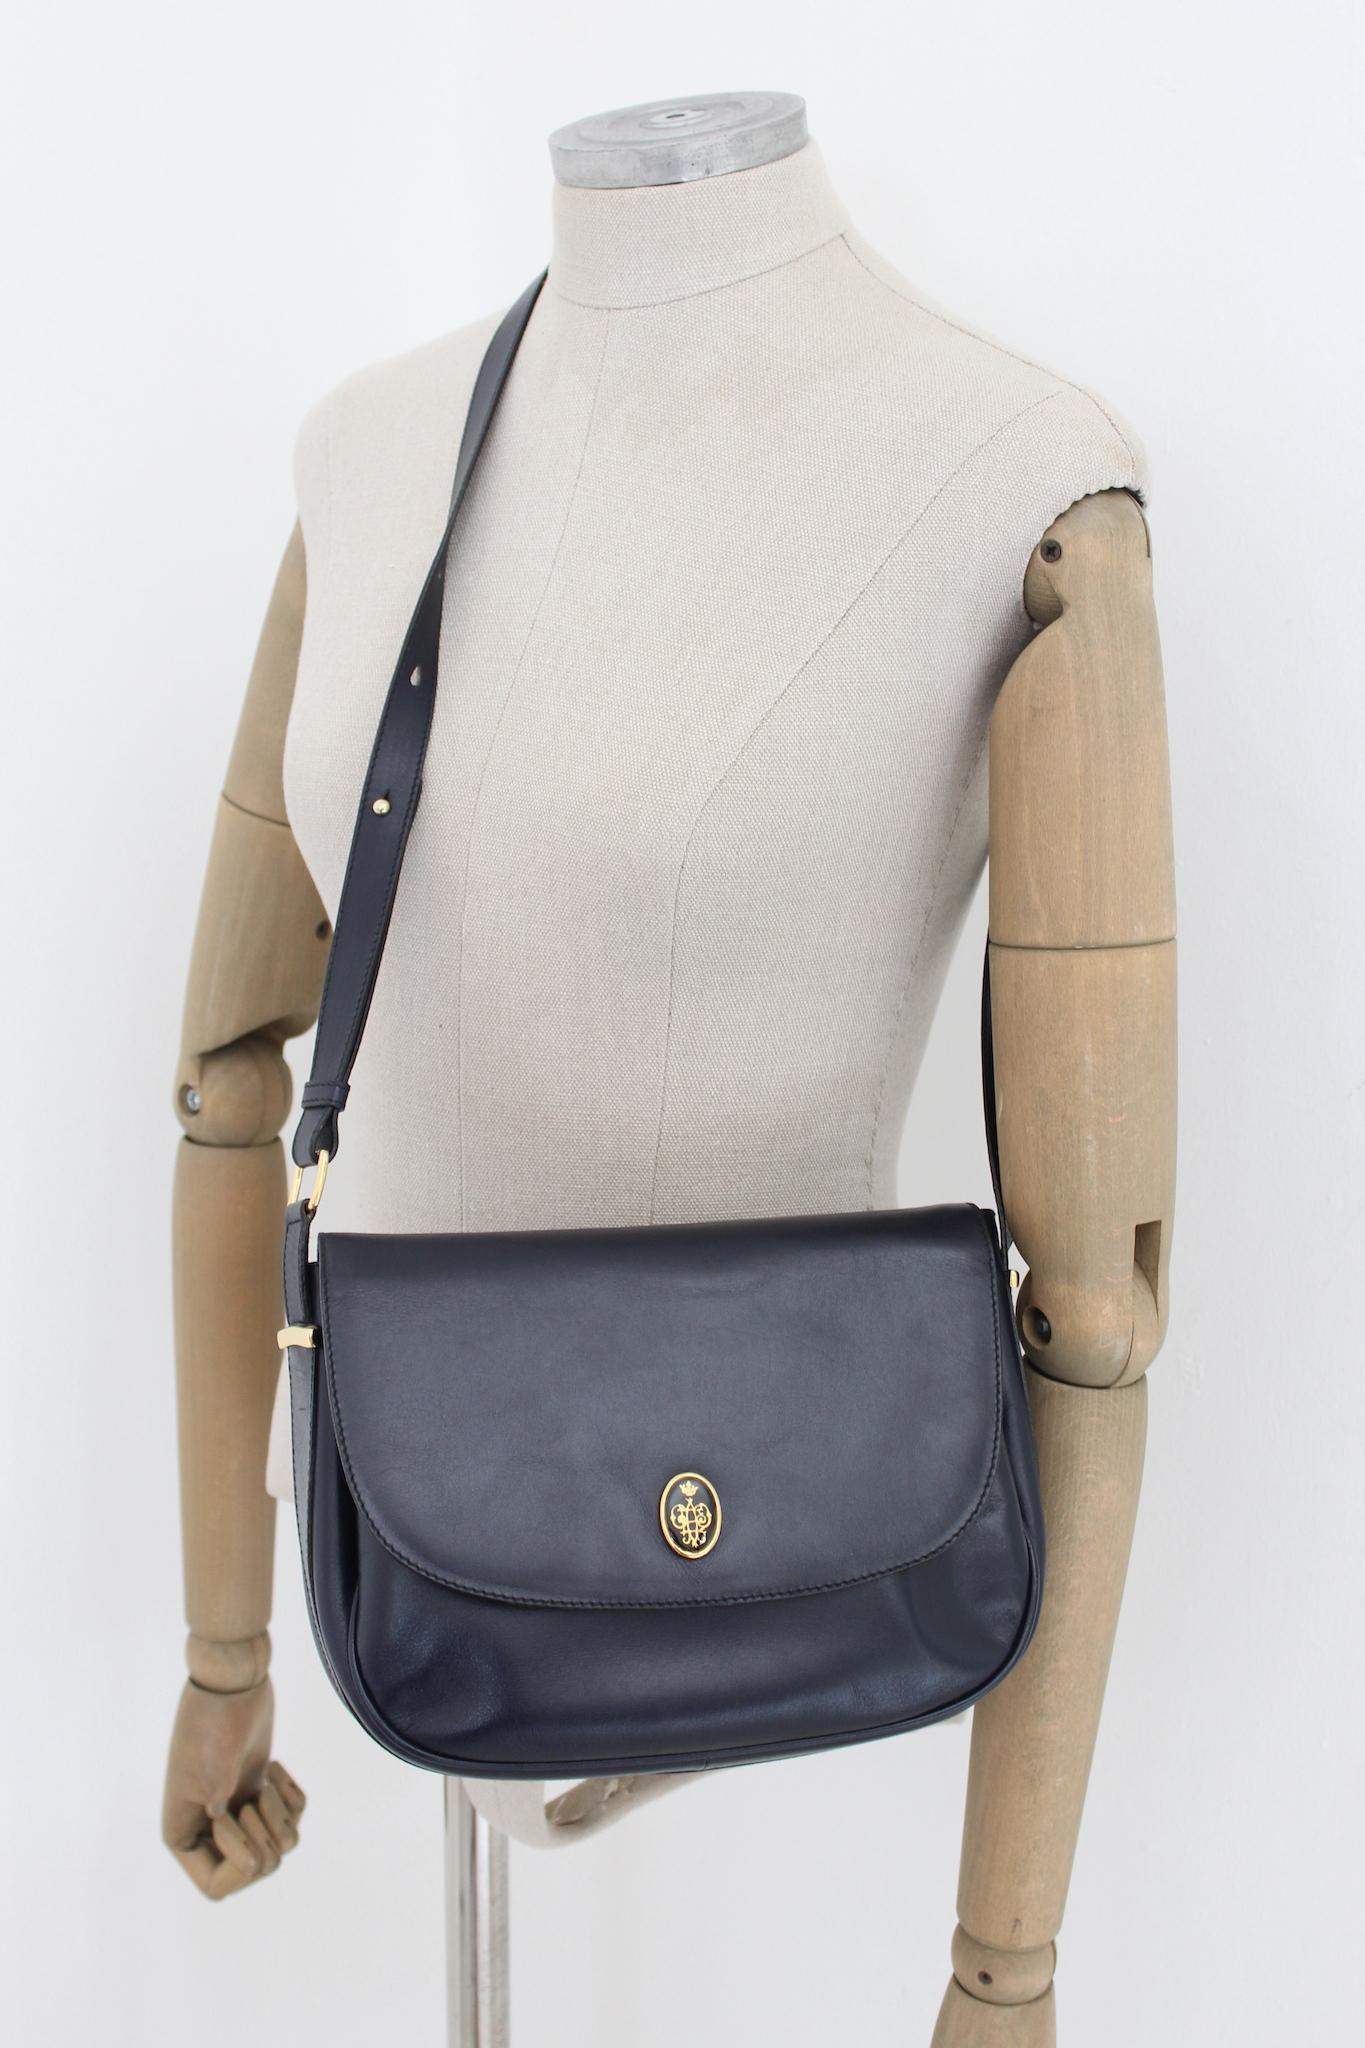 Emilio Pucci Leather Dark Blue Shoulder Bag Vintage 1980s. Beautiful half moon shape, very soft calfskin fabric. Dark blue color, adjustable shoulder strap with golden brass inserts. Inside there are two compartments and a smaller one with a zip.